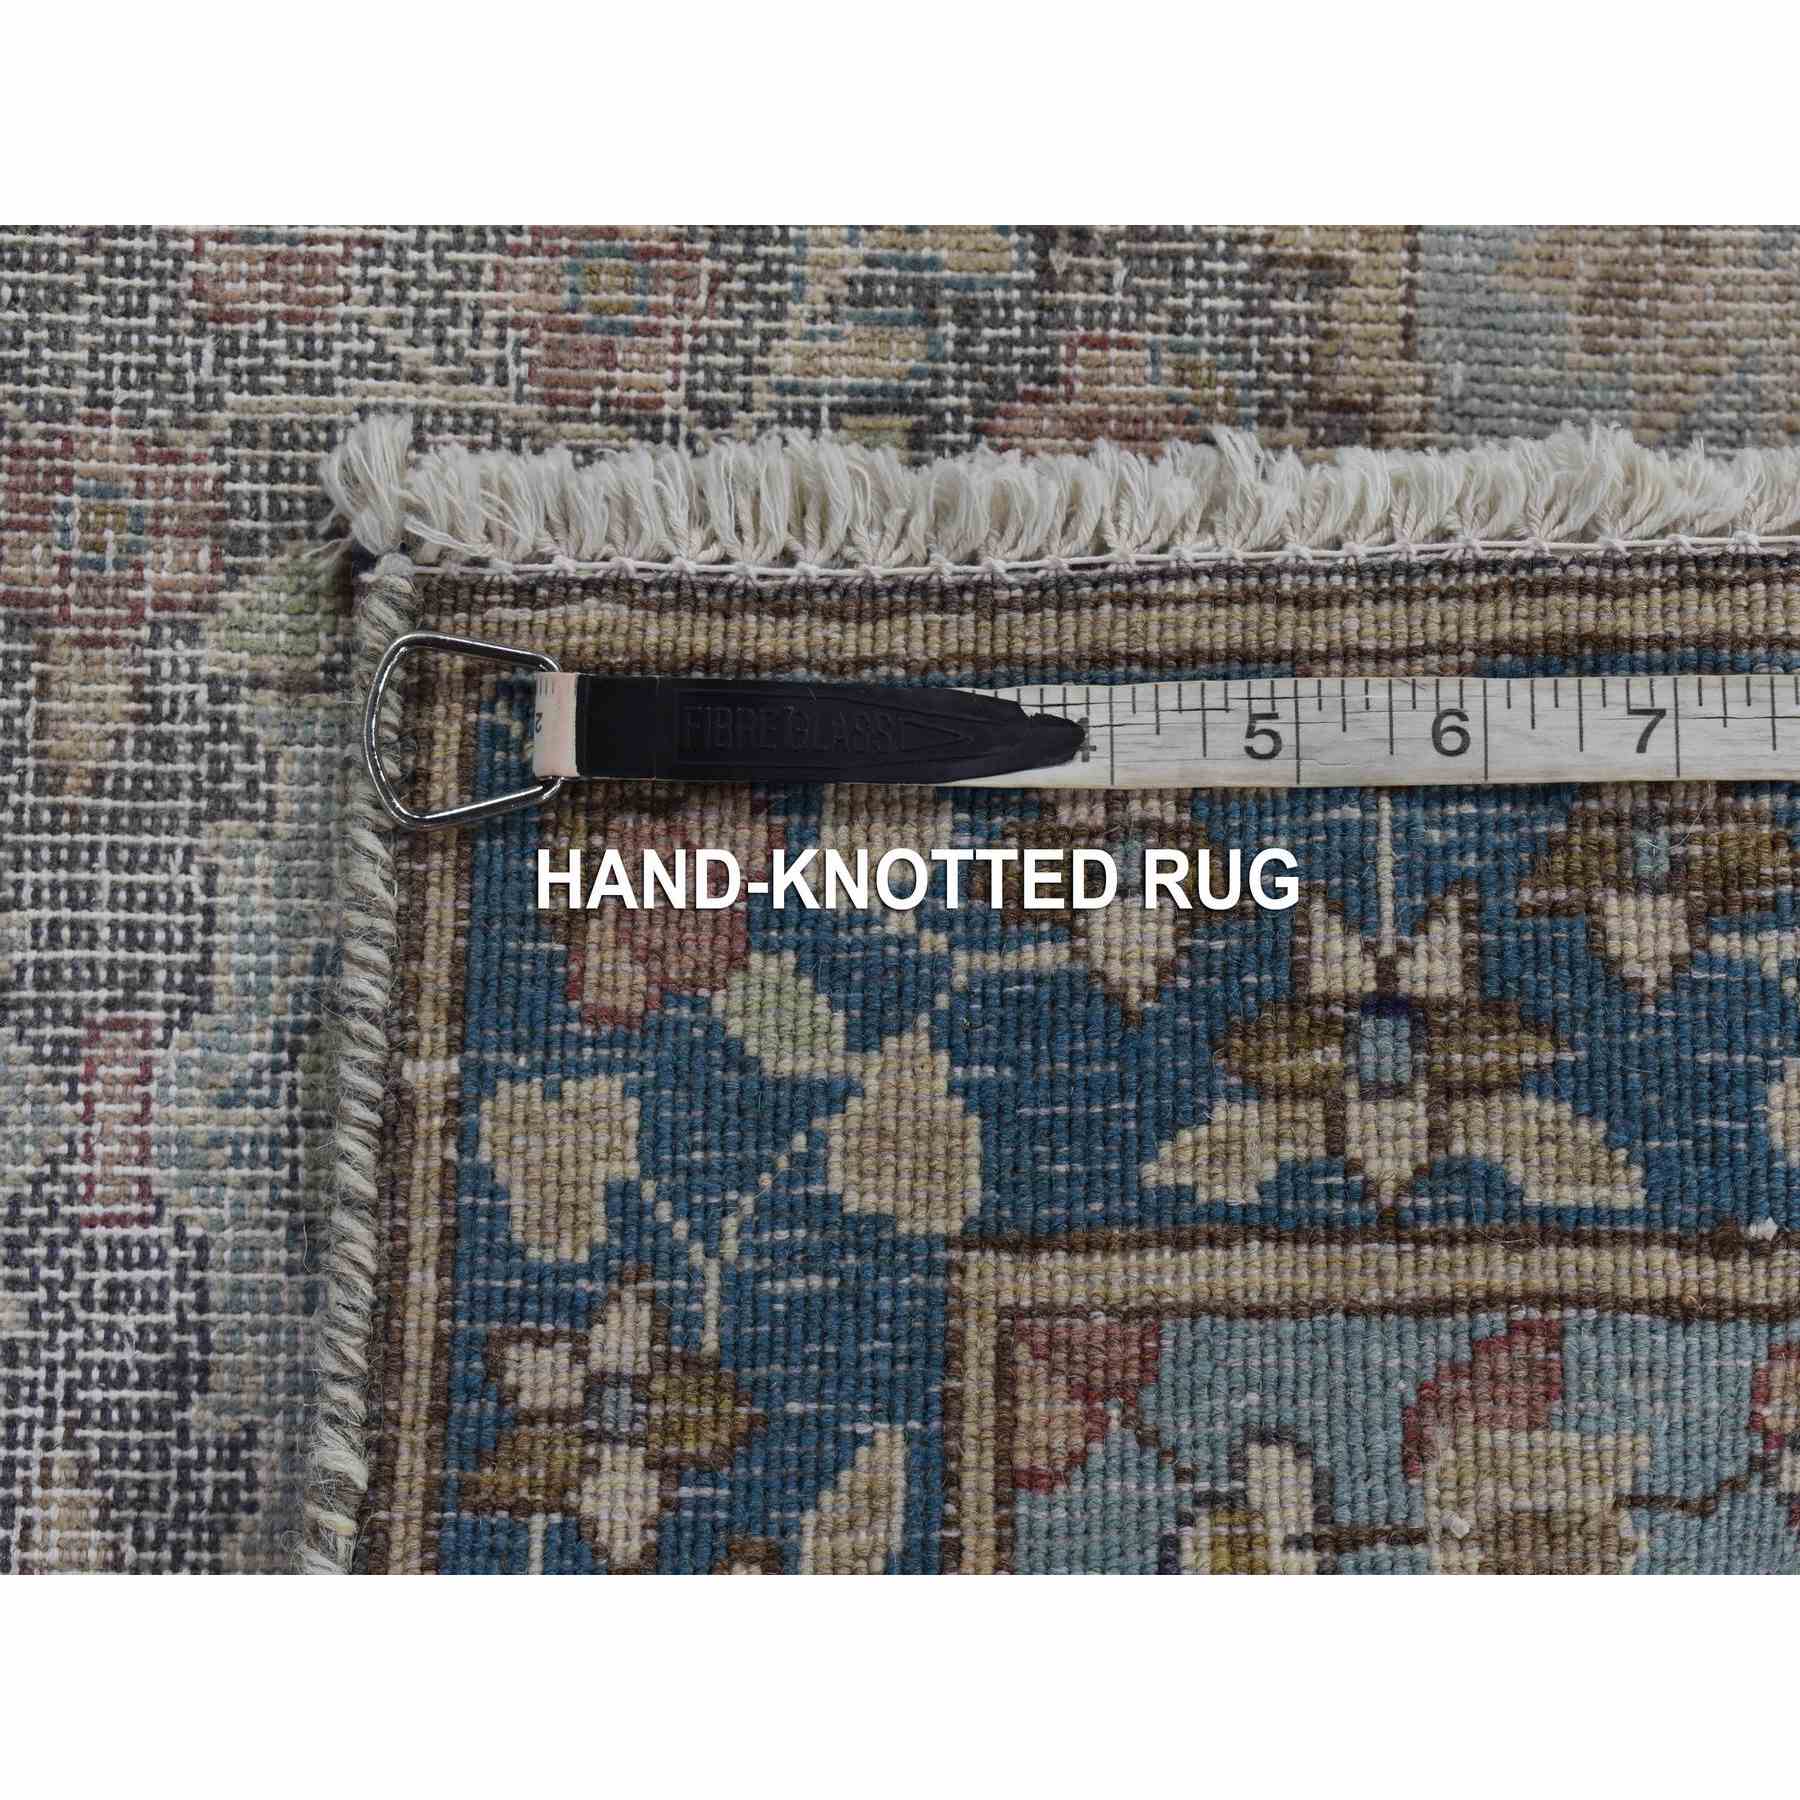 Overdyed-Vintage-Hand-Knotted-Rug-401520